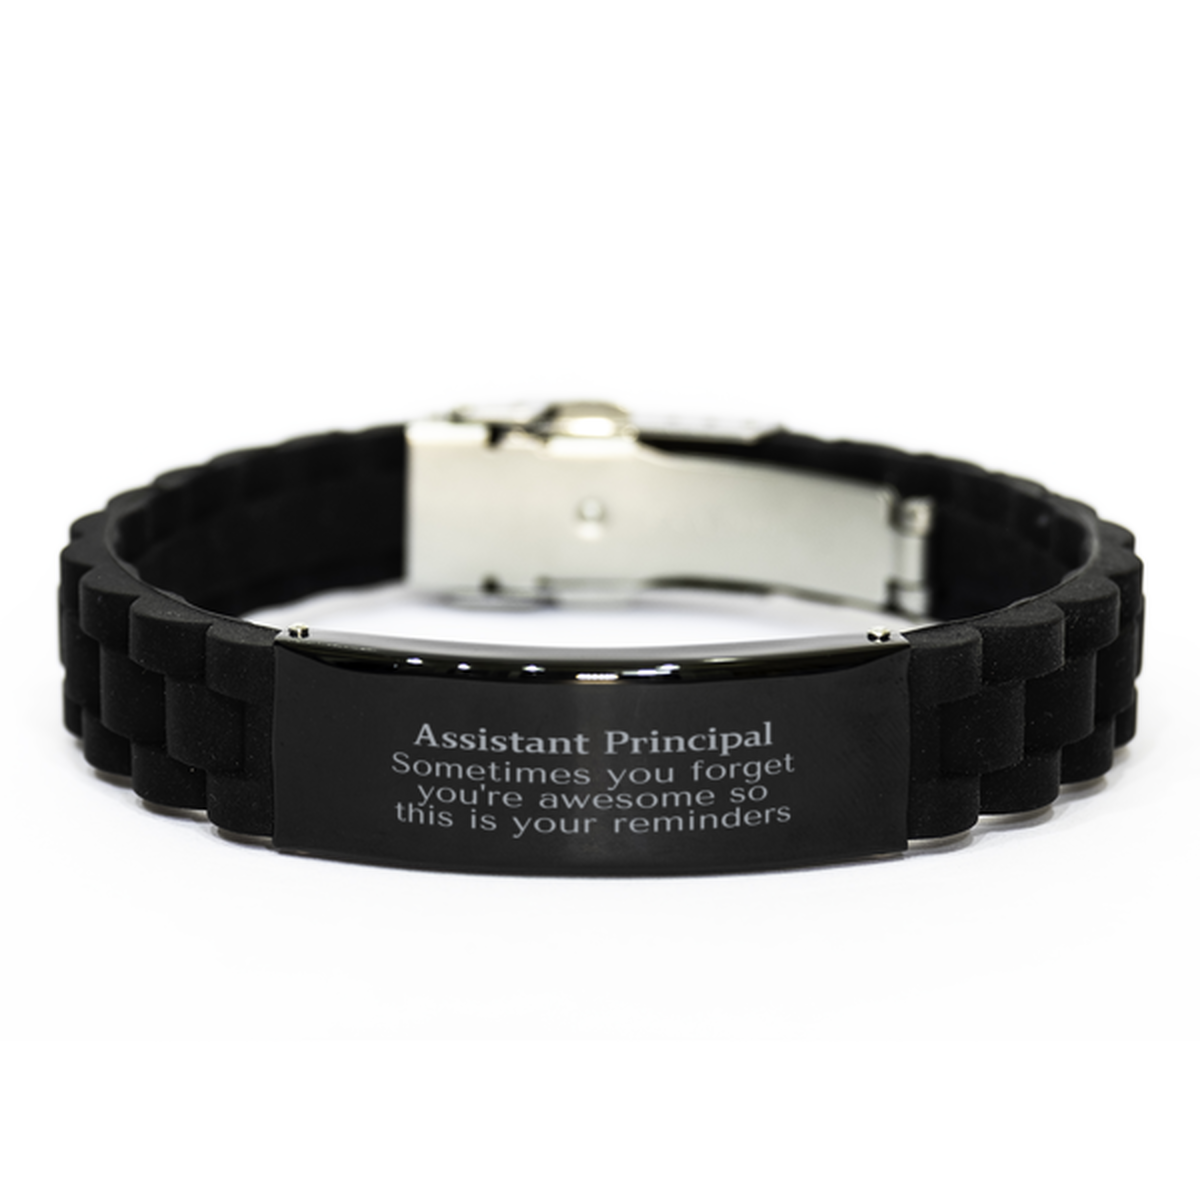 Sentimental Assistant Principal Black Glidelock Clasp Bracelet, Assistant Principal Sometimes you forget you're awesome so this is your reminders, Graduation Christmas Birthday Gifts for Assistant Principal, Men, Women, Coworkers